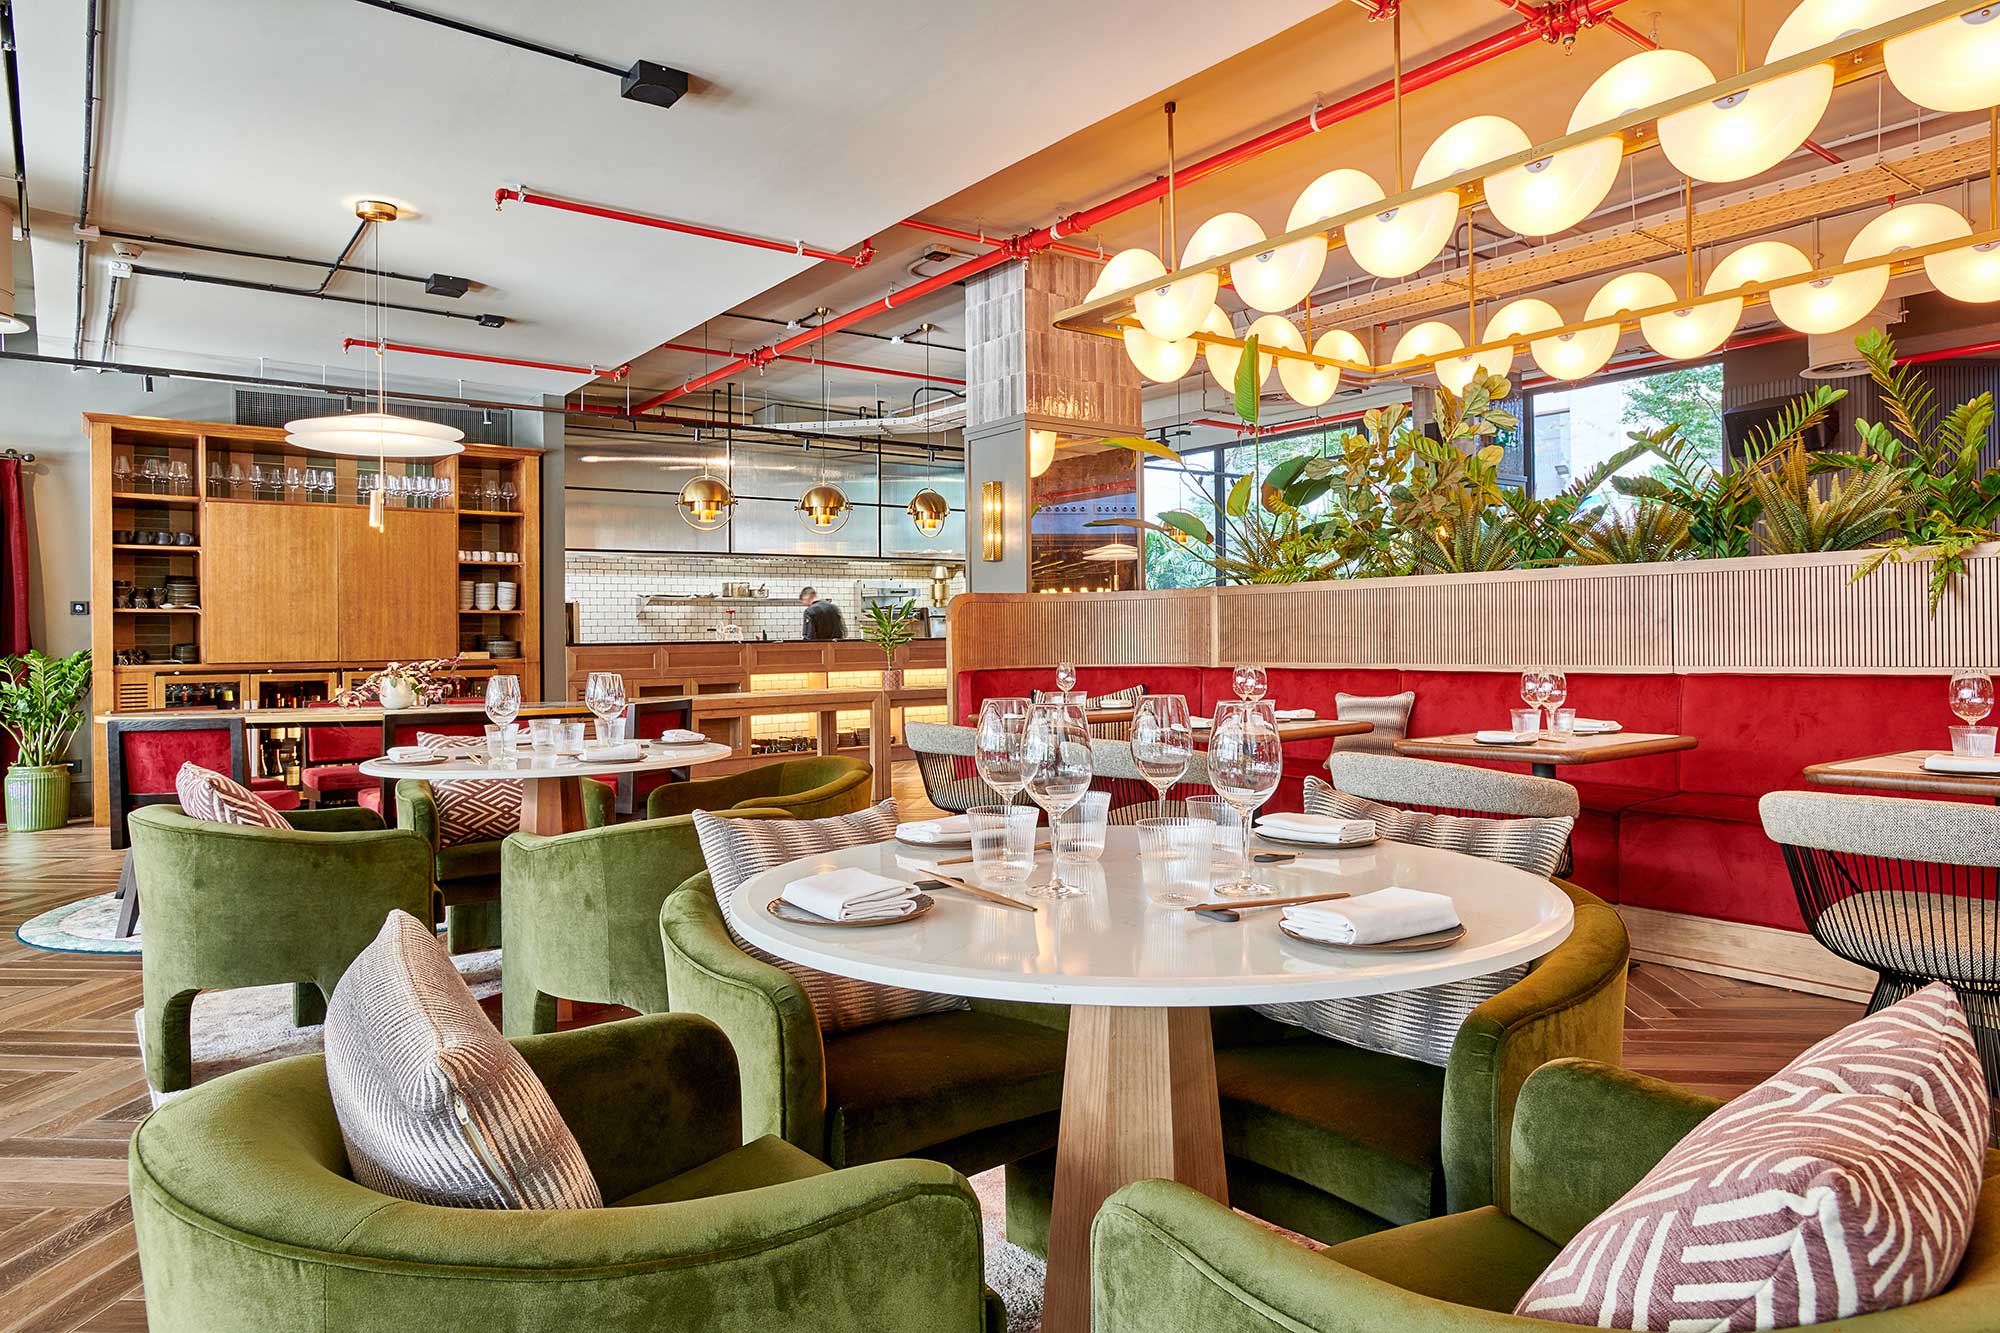 Image of radisson red madrid LGC 9218 in Silestone brings a touch of elegance to the Radisson RED Madrid hotel - Cosentino